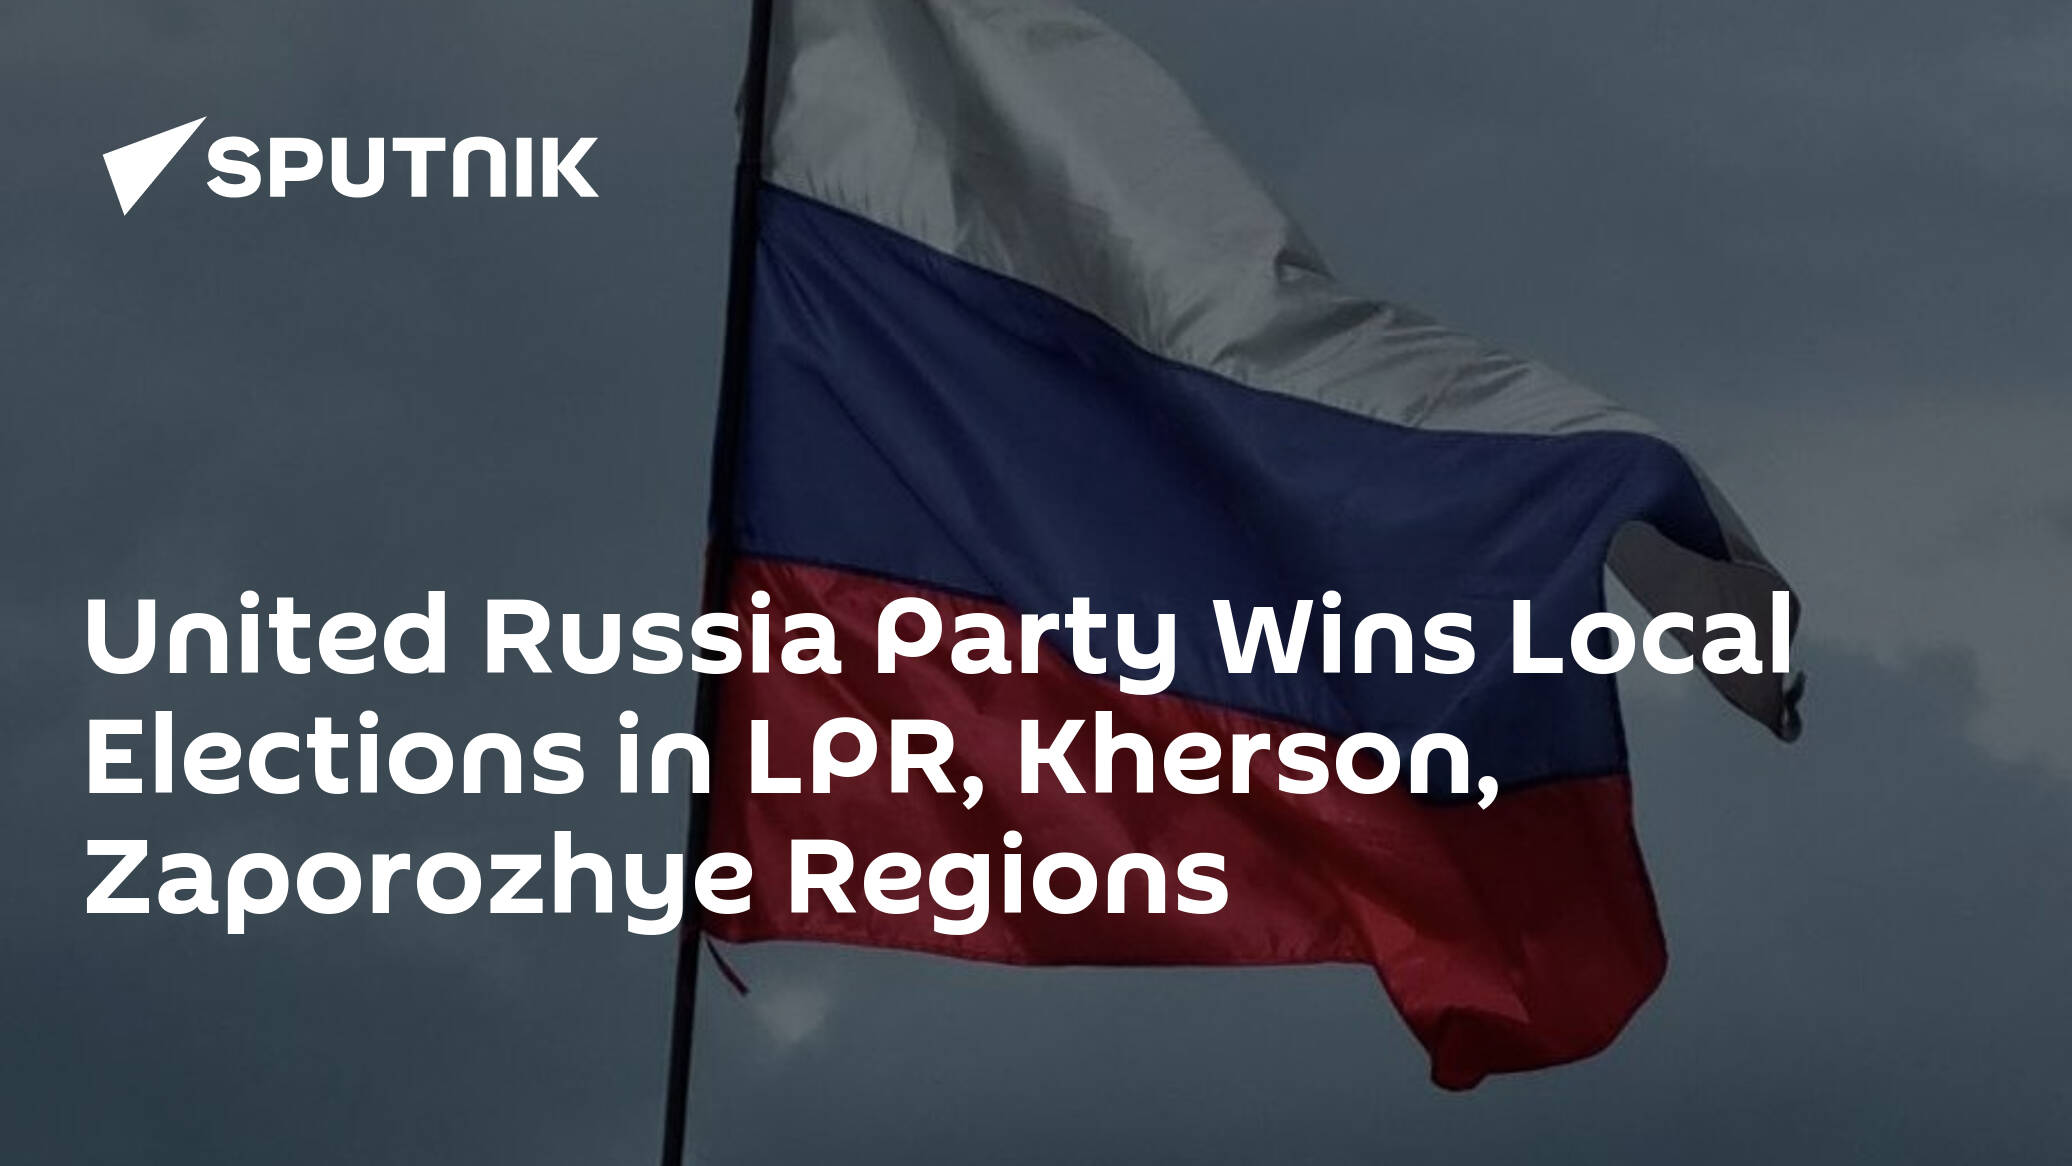 United Russia Party Wins Local Elections in LPR, Kherson, Zaporozhye Regions